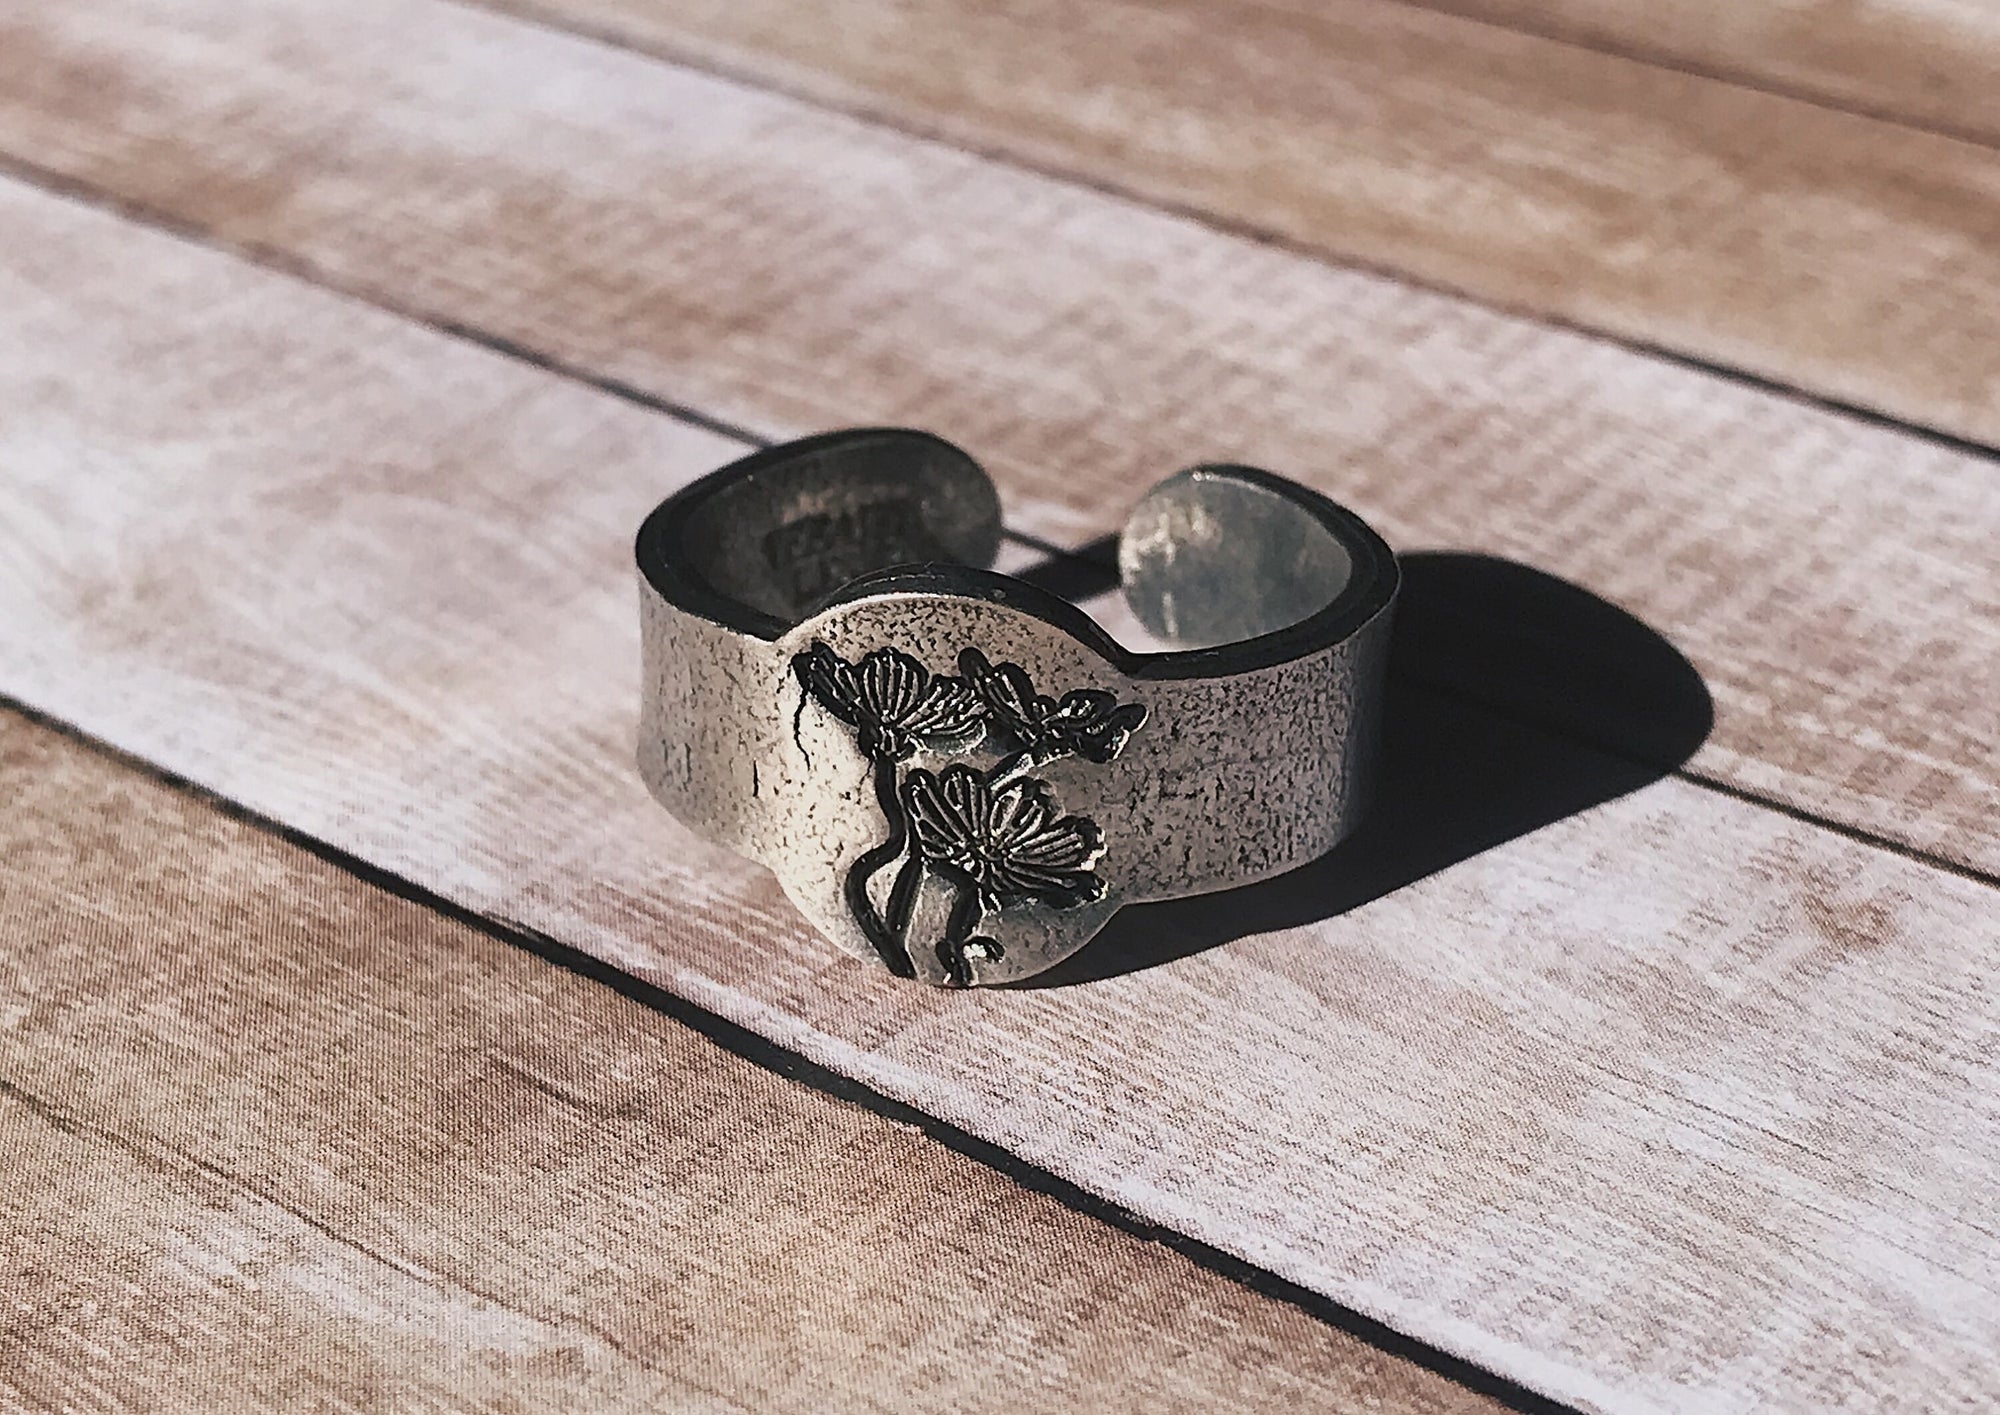 Cosmos Floral Signet Ring | Cosmos Jewelry | Rustic Birth Flower Ring | Best Friend Birthday Gifts | Mother's Day Gift | Best Friend Ring